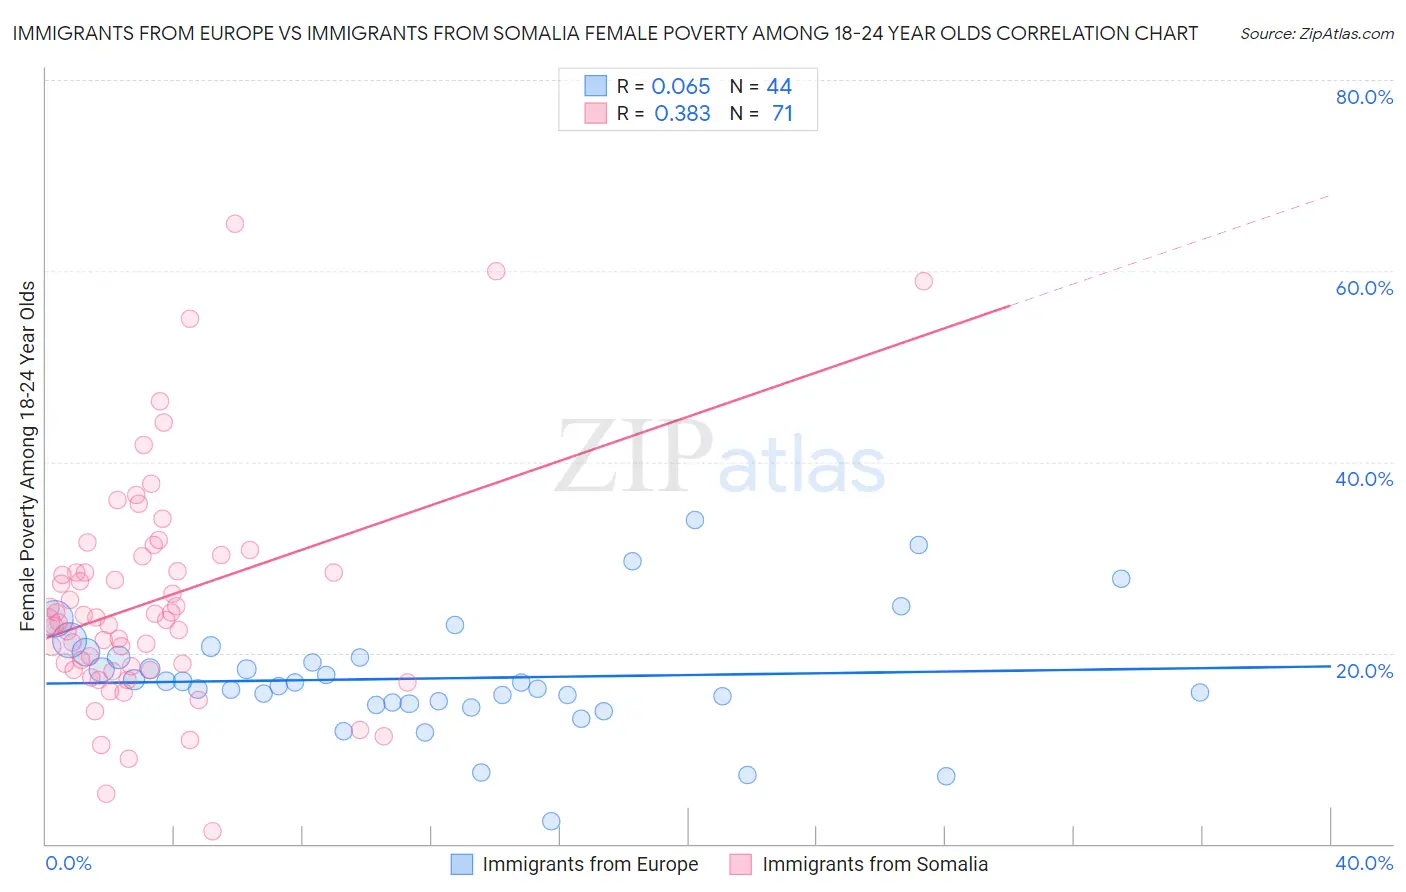 Immigrants from Europe vs Immigrants from Somalia Female Poverty Among 18-24 Year Olds